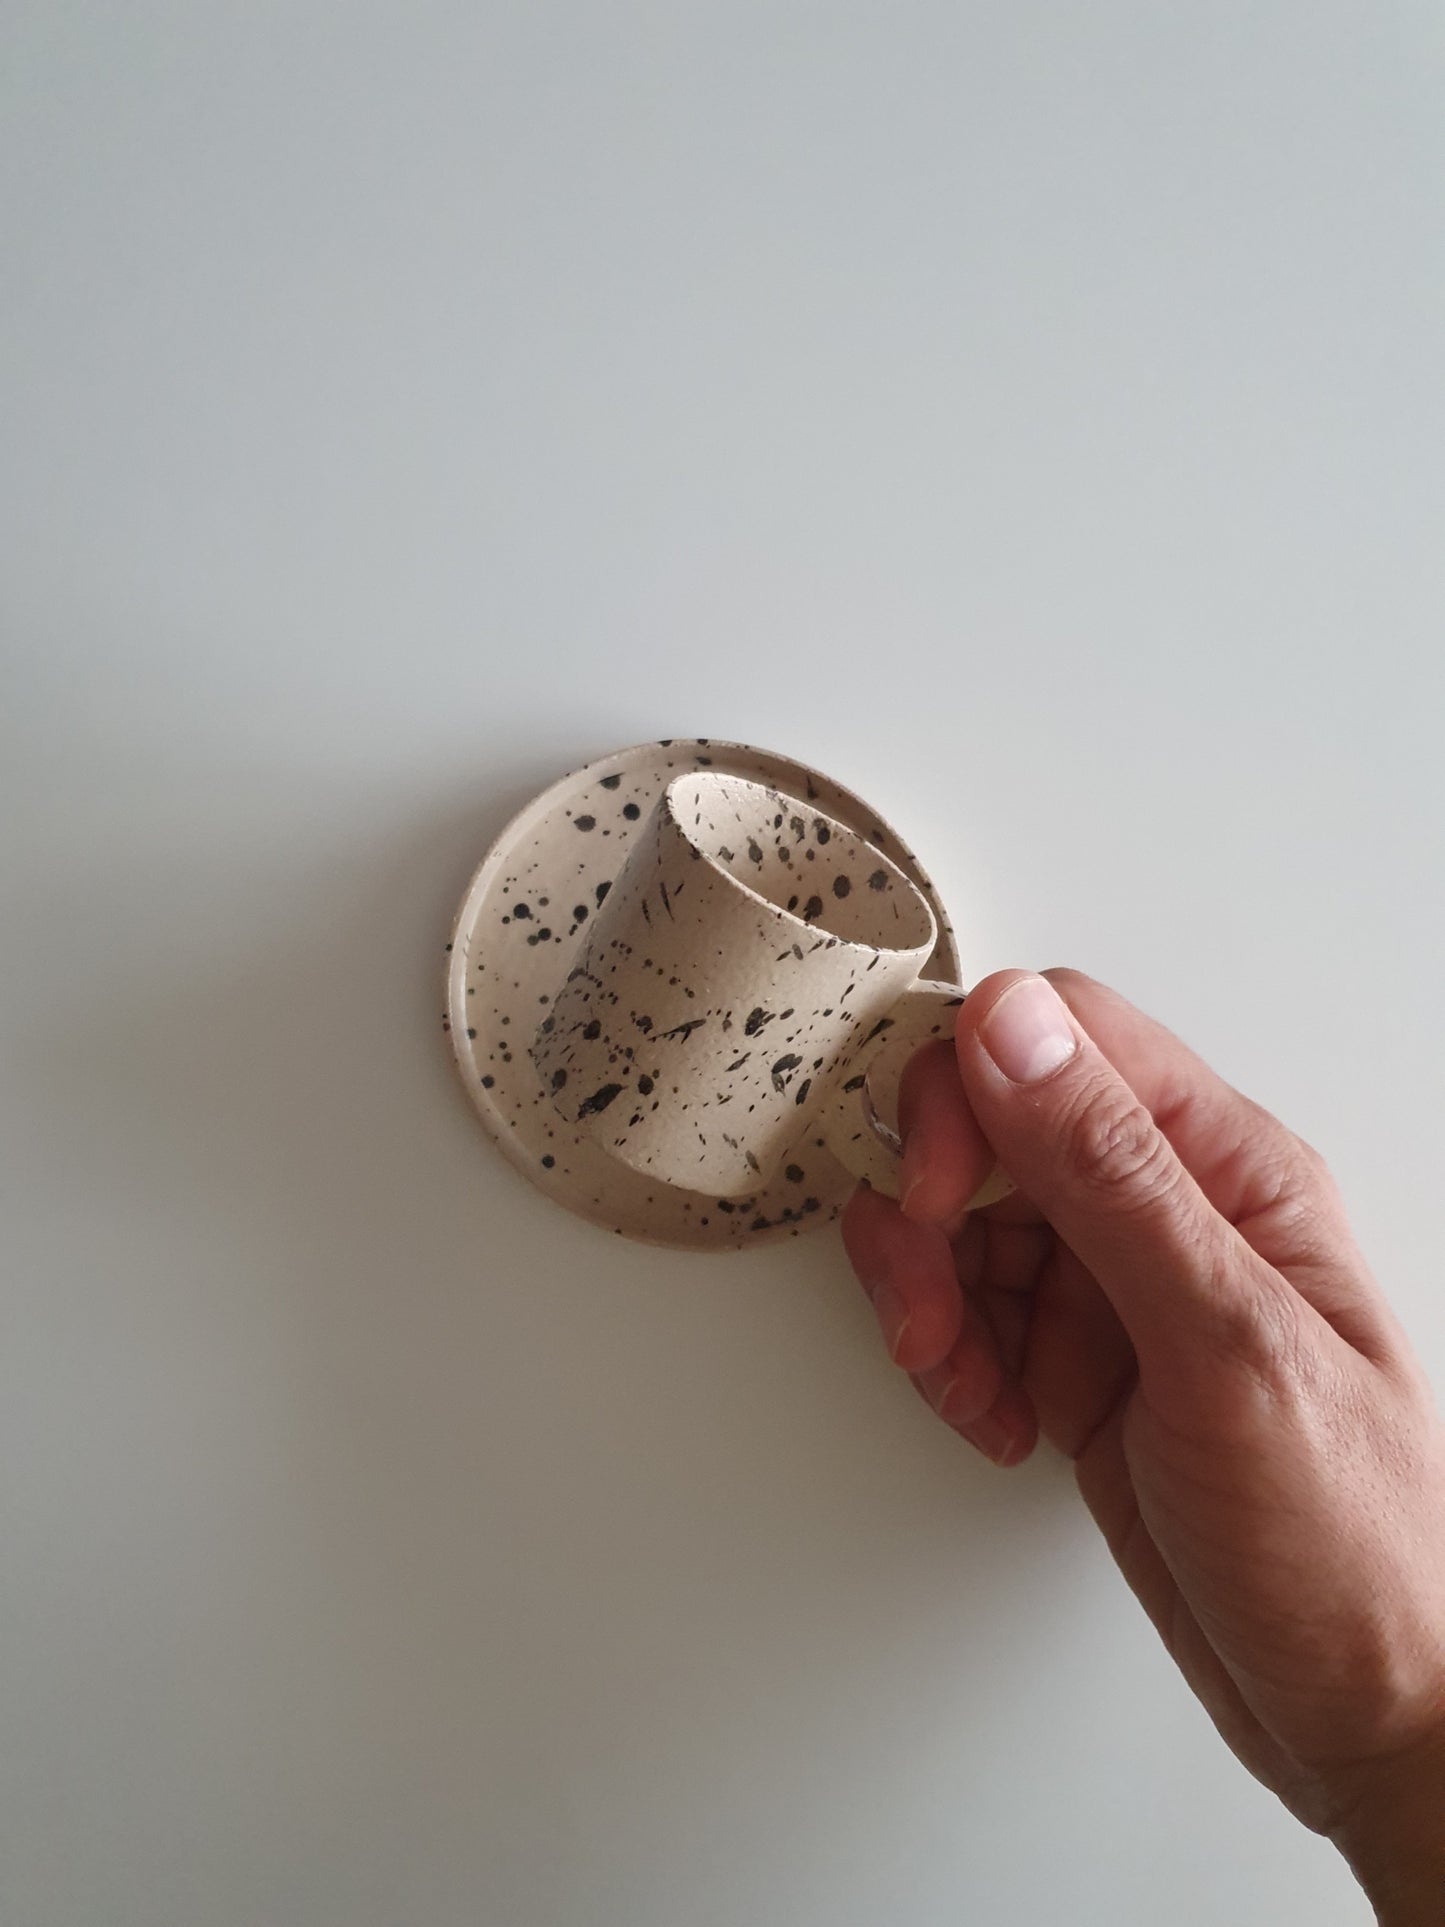 Stoneware Cup with Saucer 90 ml / 3 oz